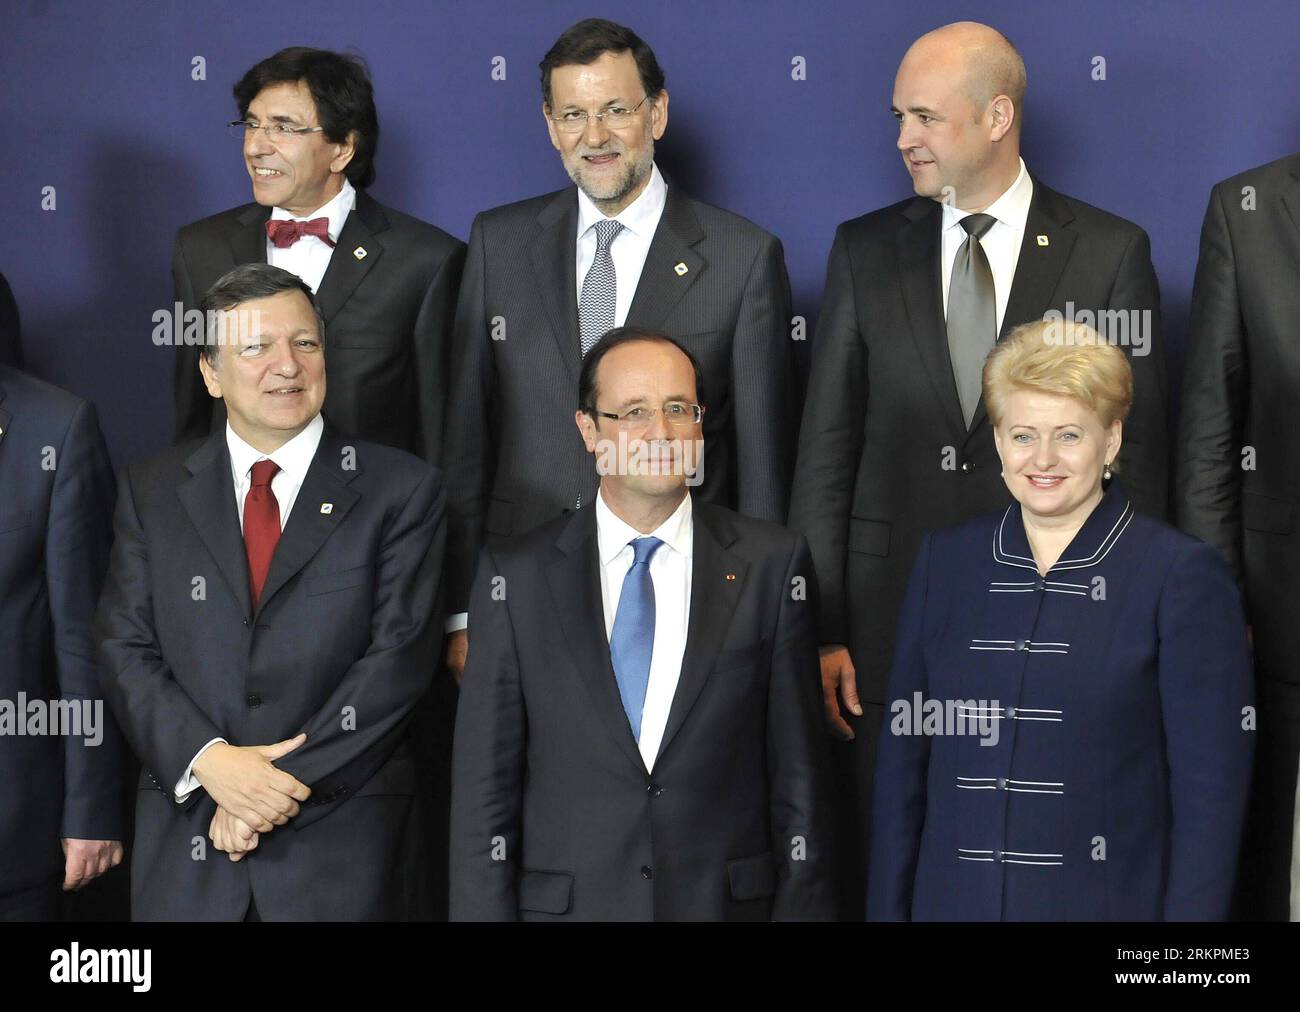 Bildnummer: 58022958  Datum: 23.05.2012  Copyright: imago/Xinhua (120523) -- BRUSSELS, May 23, 2012 (Xinhua) -- European Commission President Jose Manuel Barroso, French President Francois Hollande, Lithuanian President Dalia Grybauskaite (Front L to R), Belgian Prime Minister Elio Di Rupo, Spanish Prime Minister Mariano Rajoy, Swedish Prime Minister Fredirk Reinfeldt (Rear L to R) attend the group photo session of an informal dinner of European Union (EU) leaders in Brussels, capital of Belgium, on May 23, 2012. (Xinhua/Wu Wei) BELGIUM-EU-INFORMAL DINNER PUBLICATIONxNOTxINxCHN People Politik Stock Photo